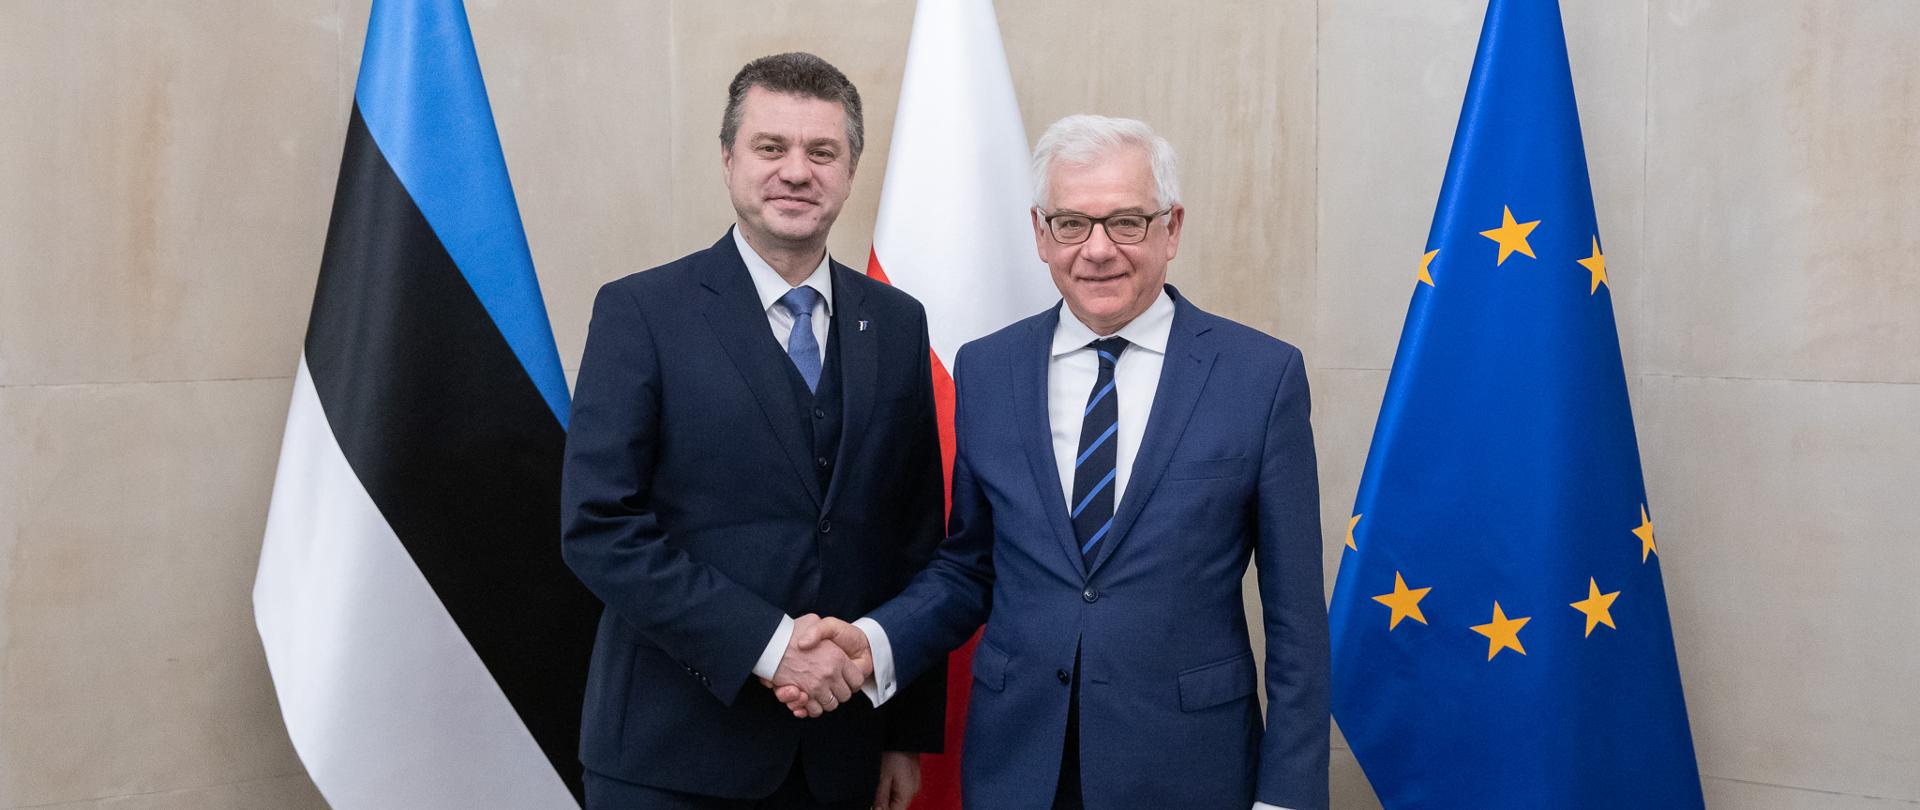 Estonian foreign minister pays his first foreign bilateral visit to Warsaw